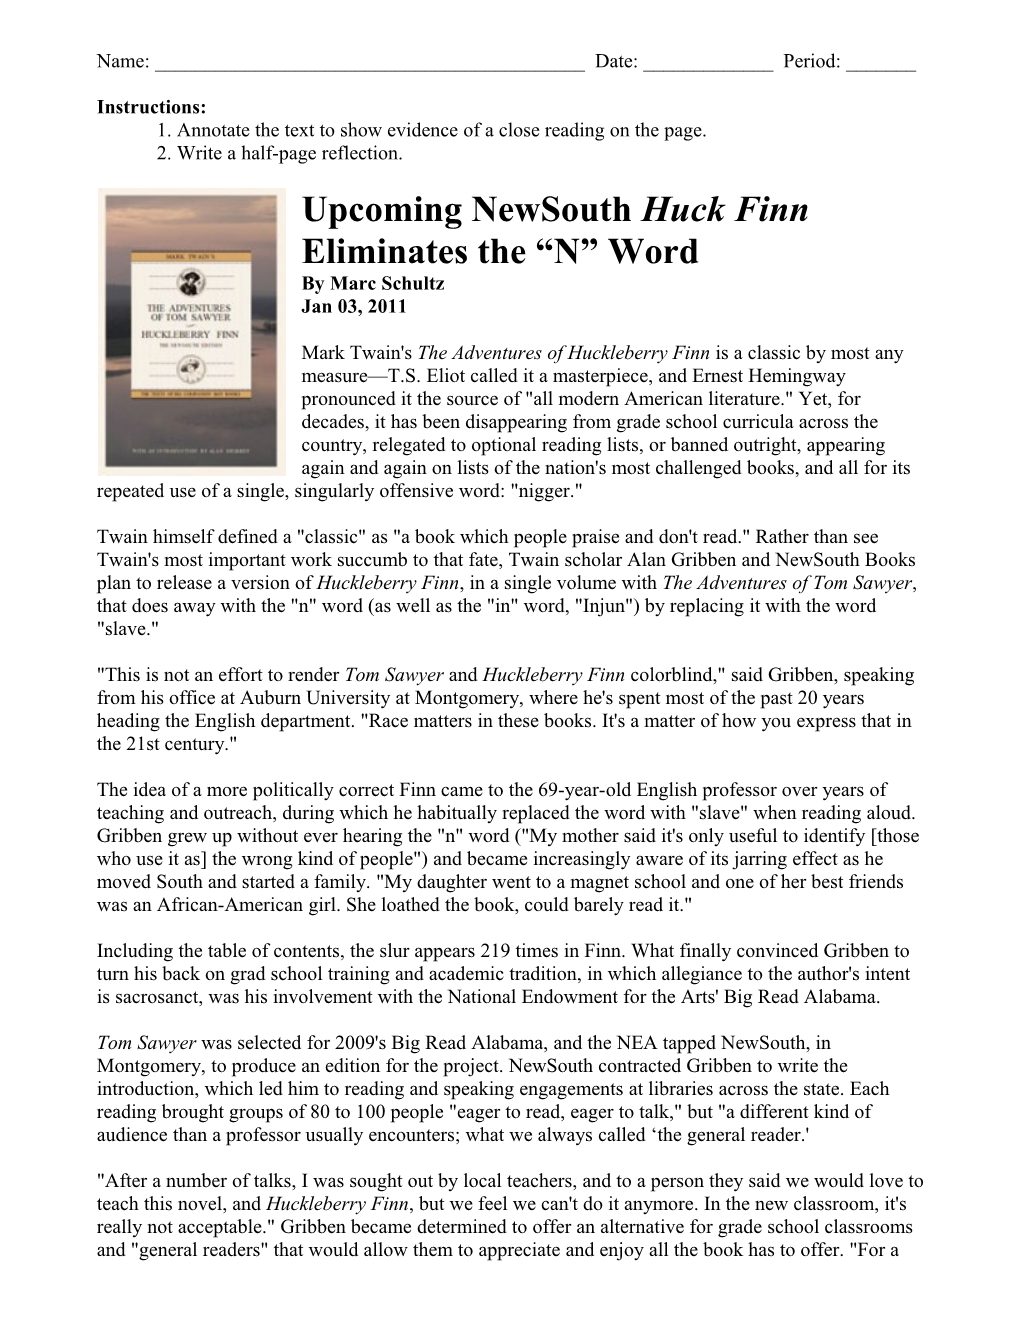 Upcoming Newsouth Huck Finn Eliminates the N Word